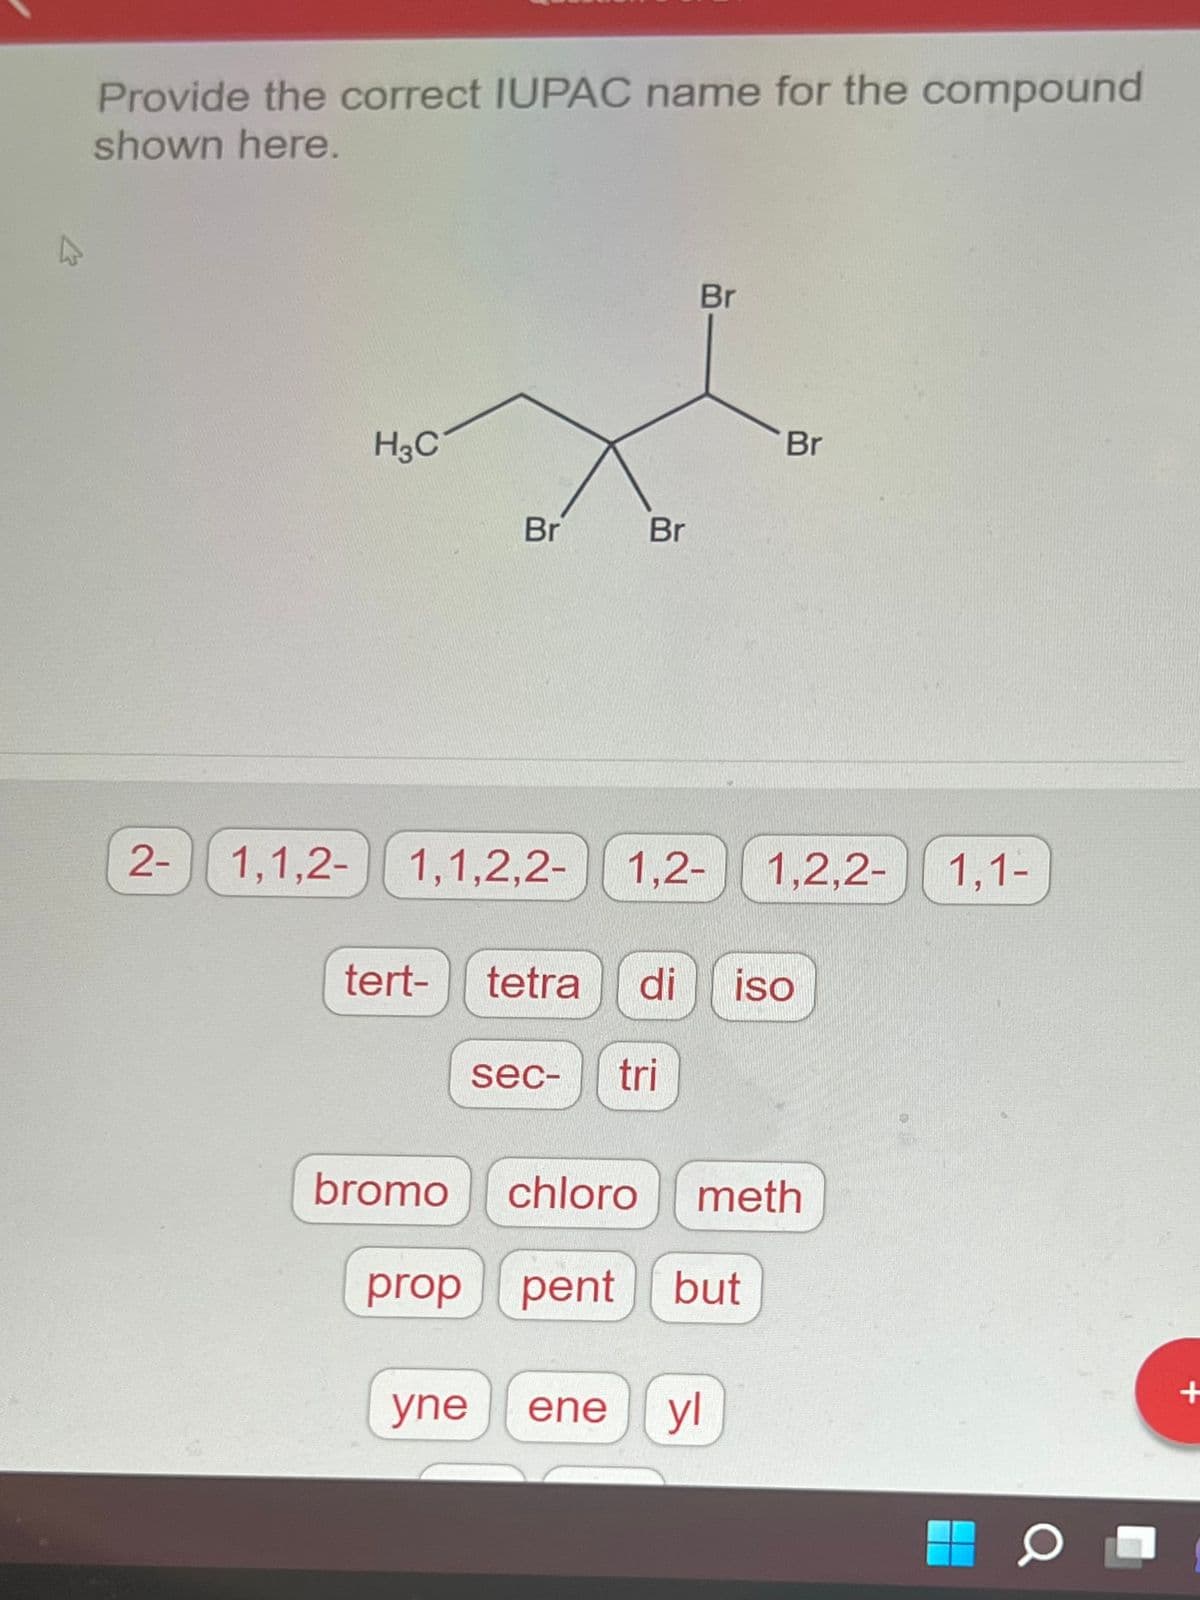 Provide the correct IUPAC name for the compound
shown here.
2-
H3C
1,1,2-1,1,2,2-
tert-
bromo
prop
Br
yne
Br
Br
sec- tri
1,2- 1,2,2- 1.1-
tetra di iso
ene
Br
chloro meth
pent but
yl
HOL
+